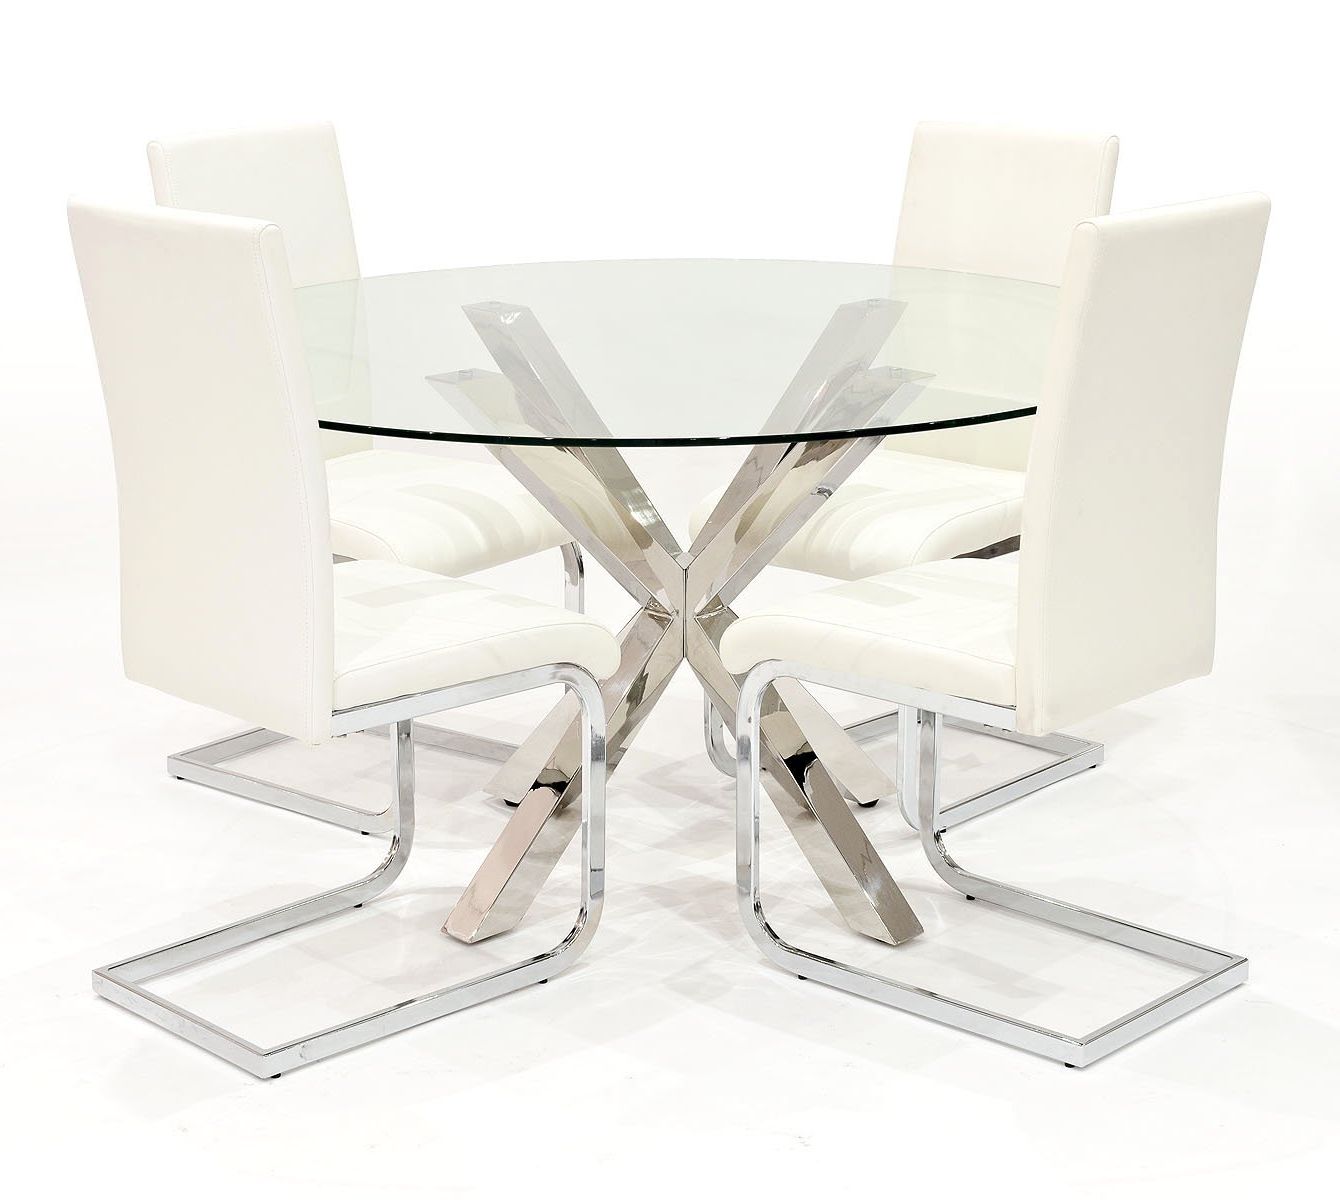 Febland Crossley Round Dining Table With Six Chairs: Amazon For Most Recently Released Eames Style Dining Tables With Chromed Leg And Tempered Glass Top (View 14 of 25)